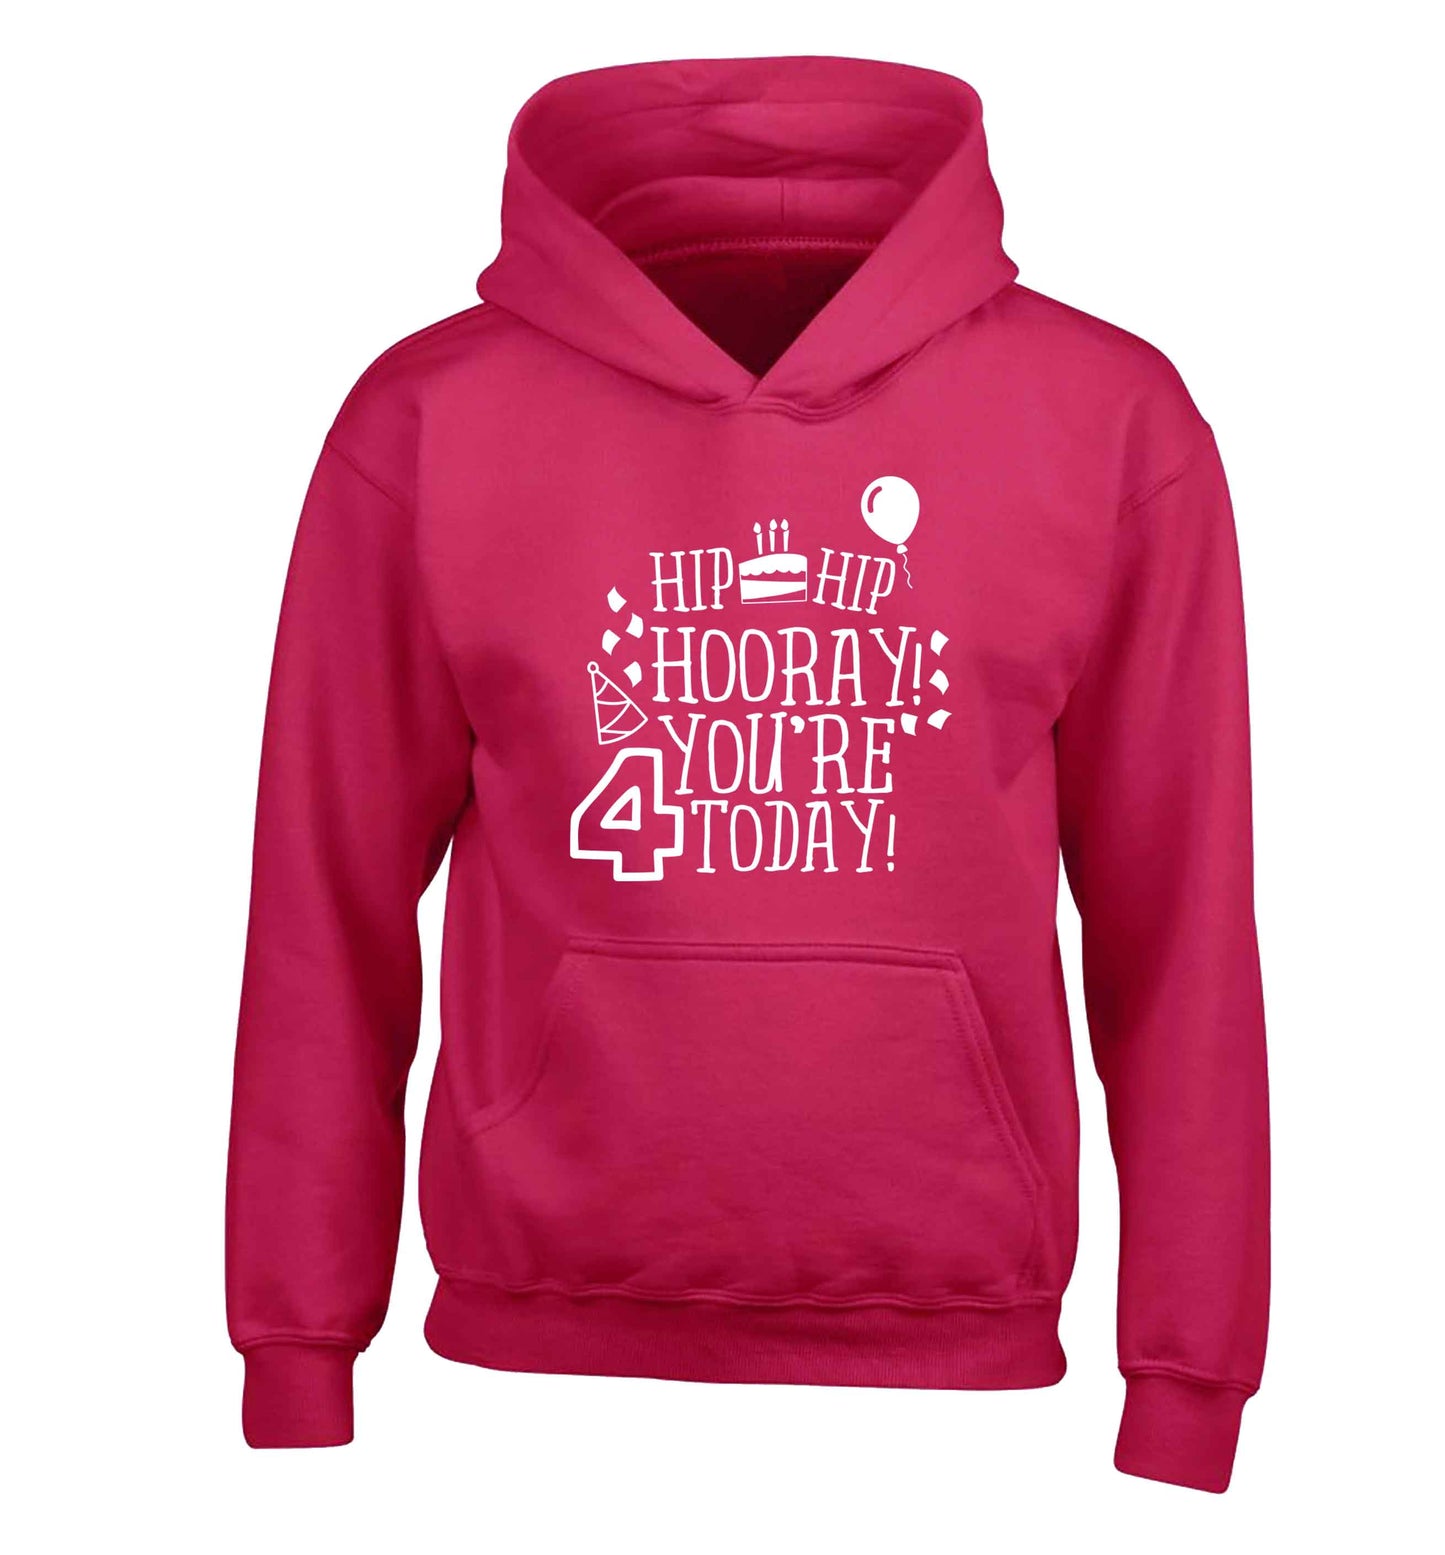 Hip hip hooray you're four today!children's pink hoodie 12-13 Years